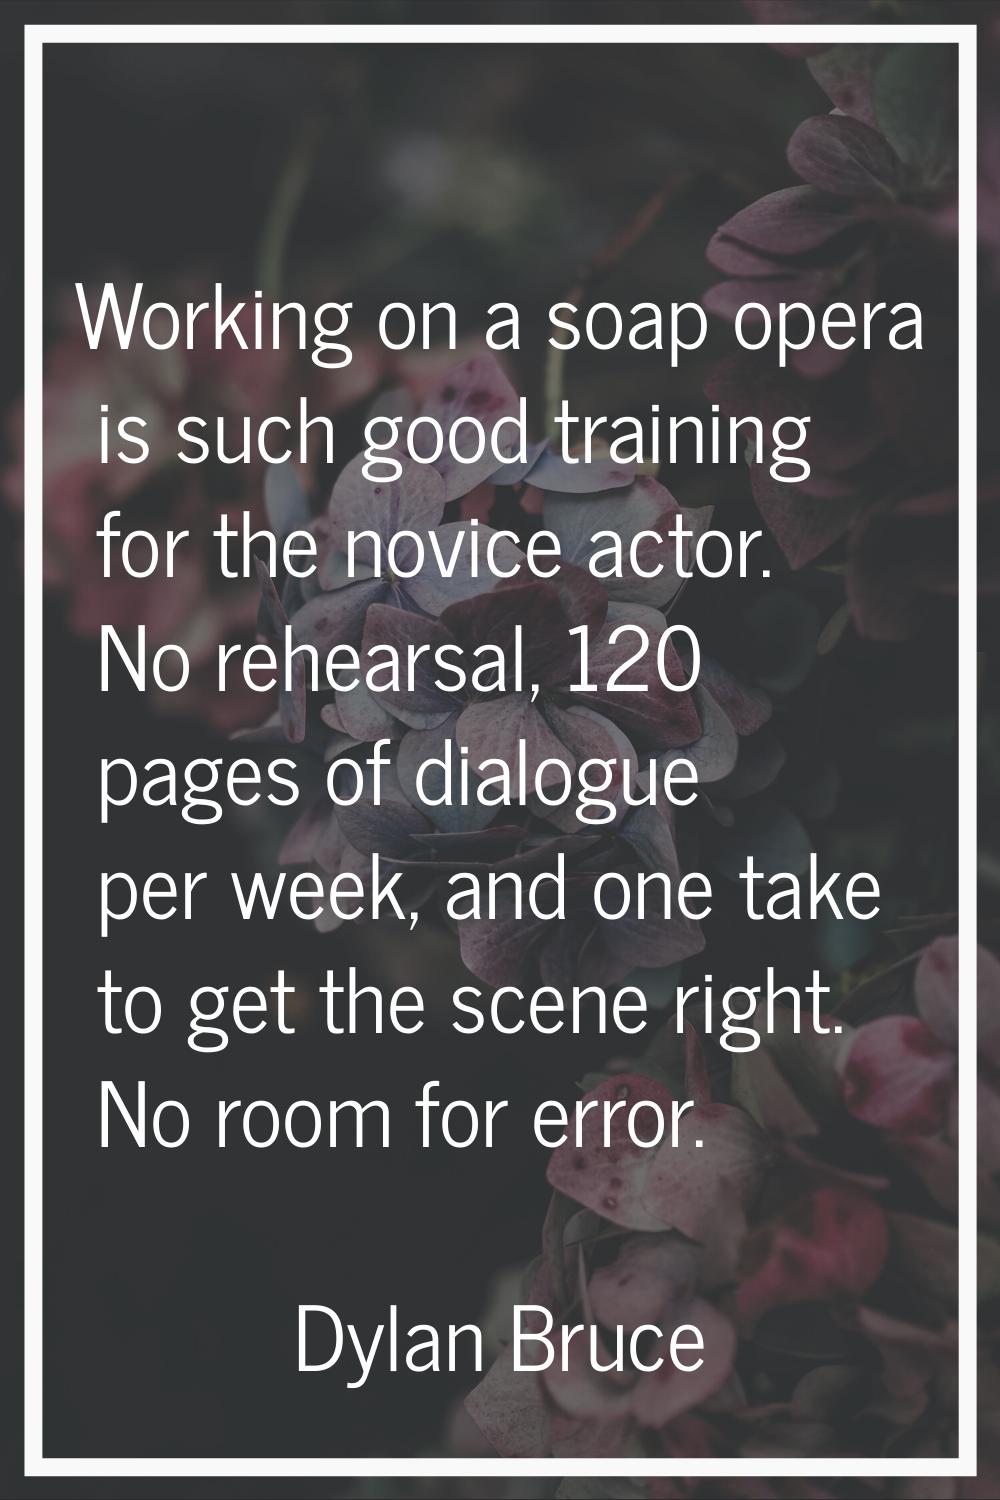 Working on a soap opera is such good training for the novice actor. No rehearsal, 120 pages of dial